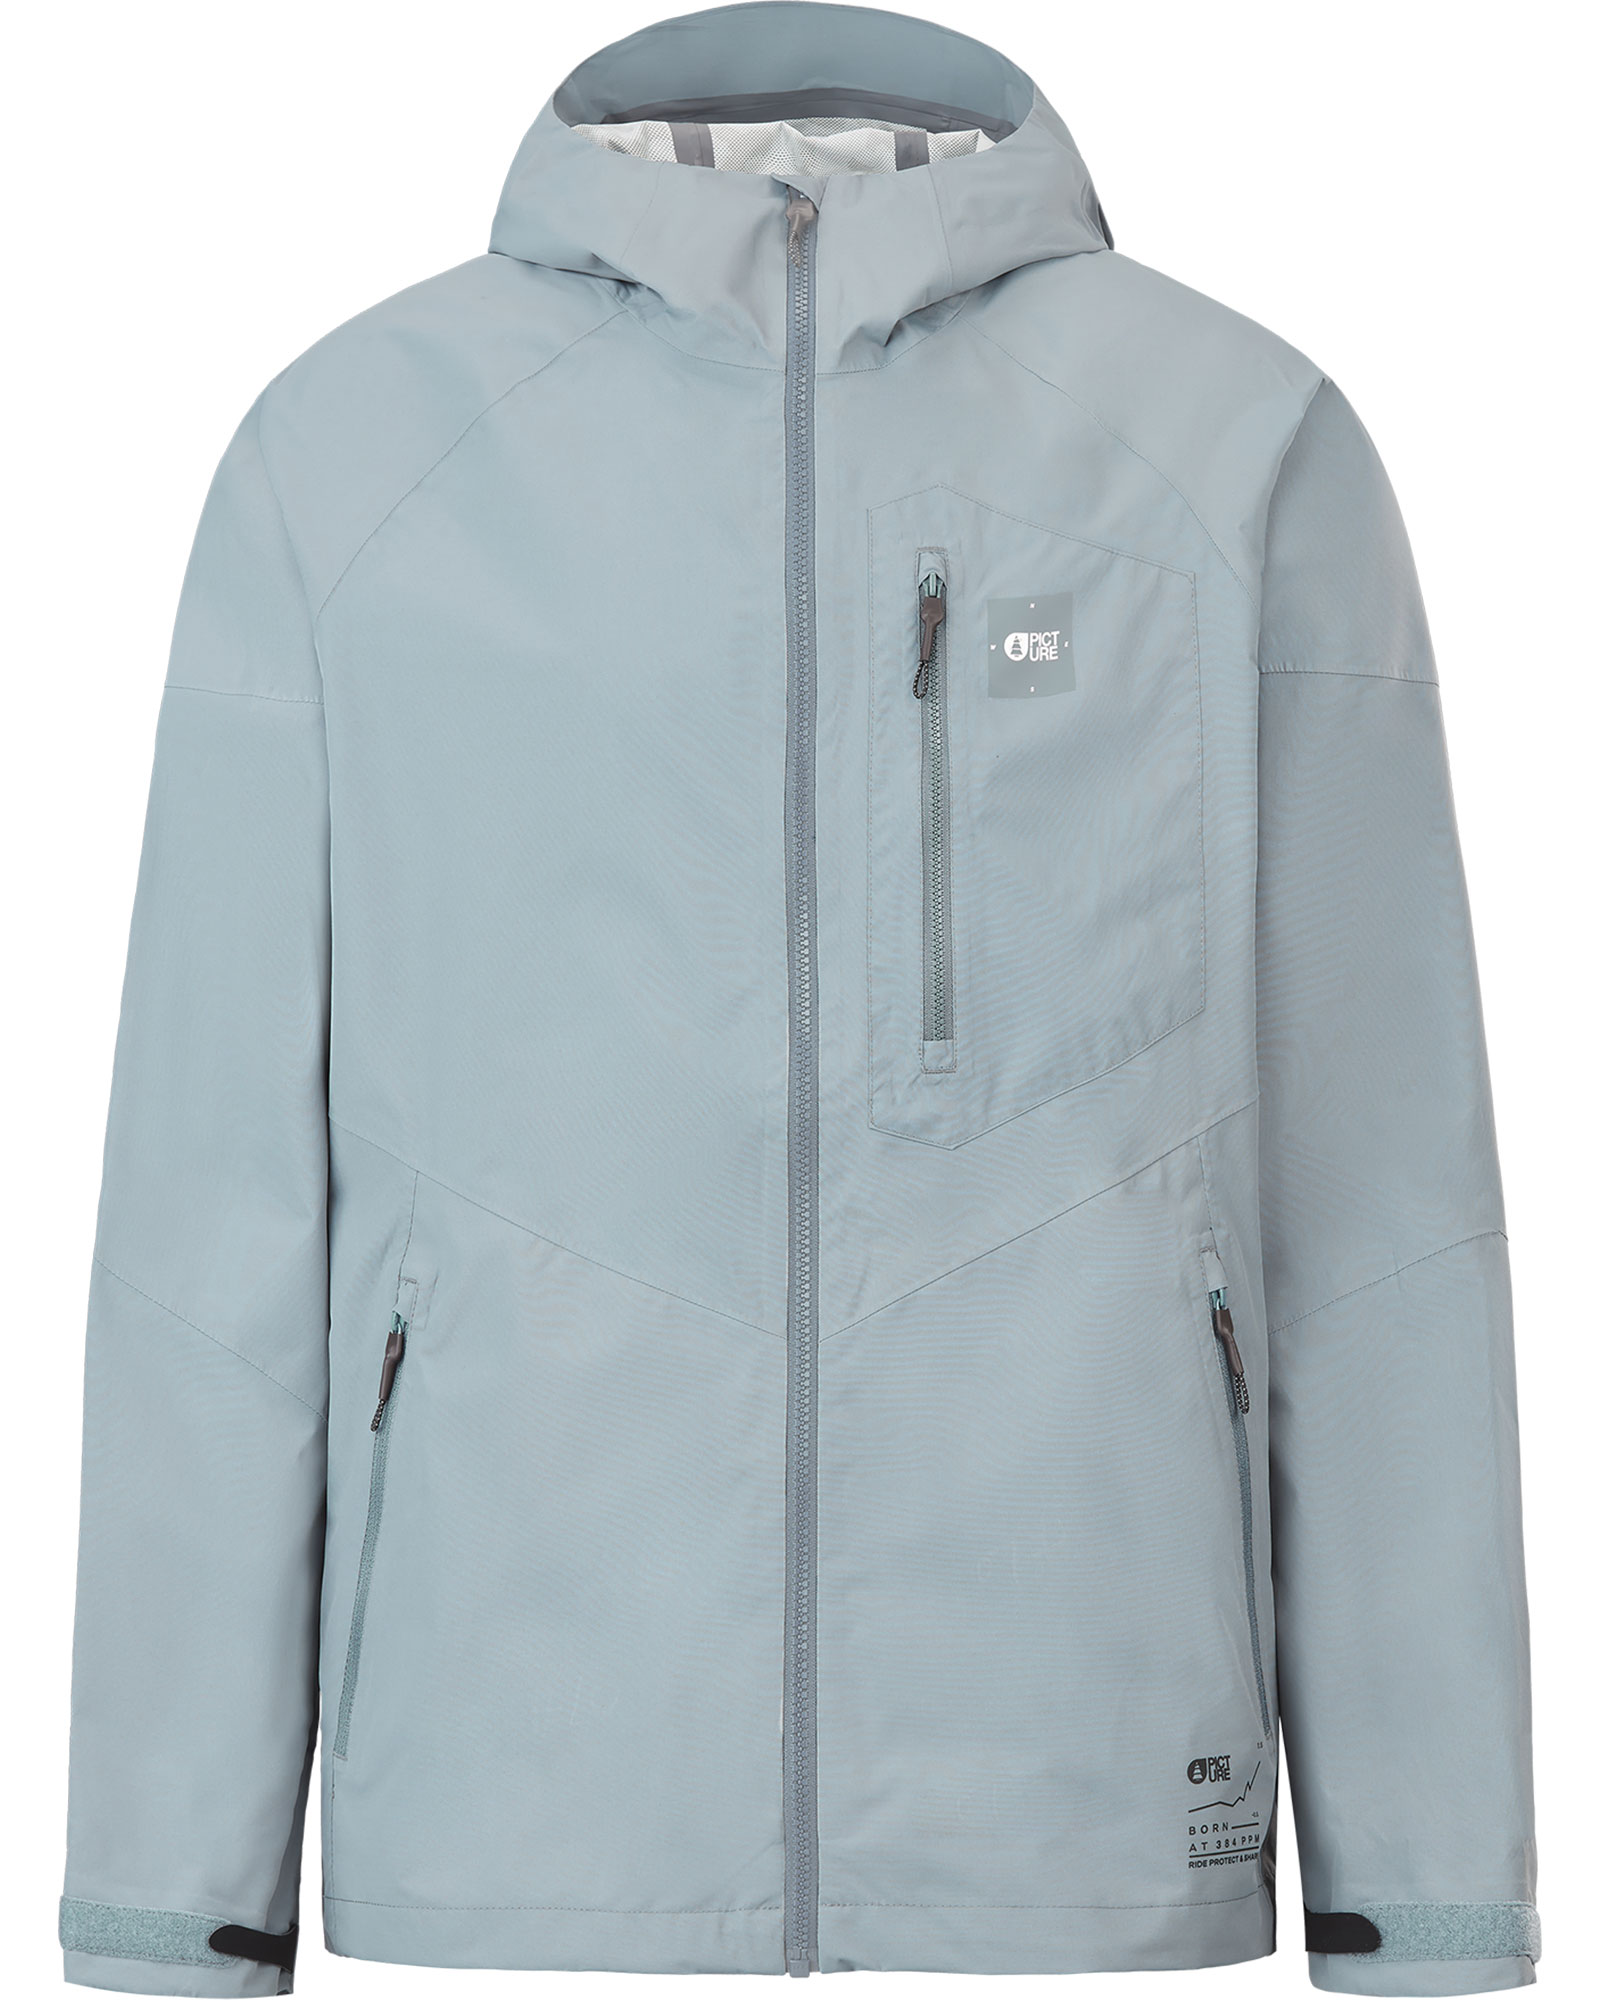 Picture Abstral+ 2.5L Men’s Jacket - Stormy Weather XL